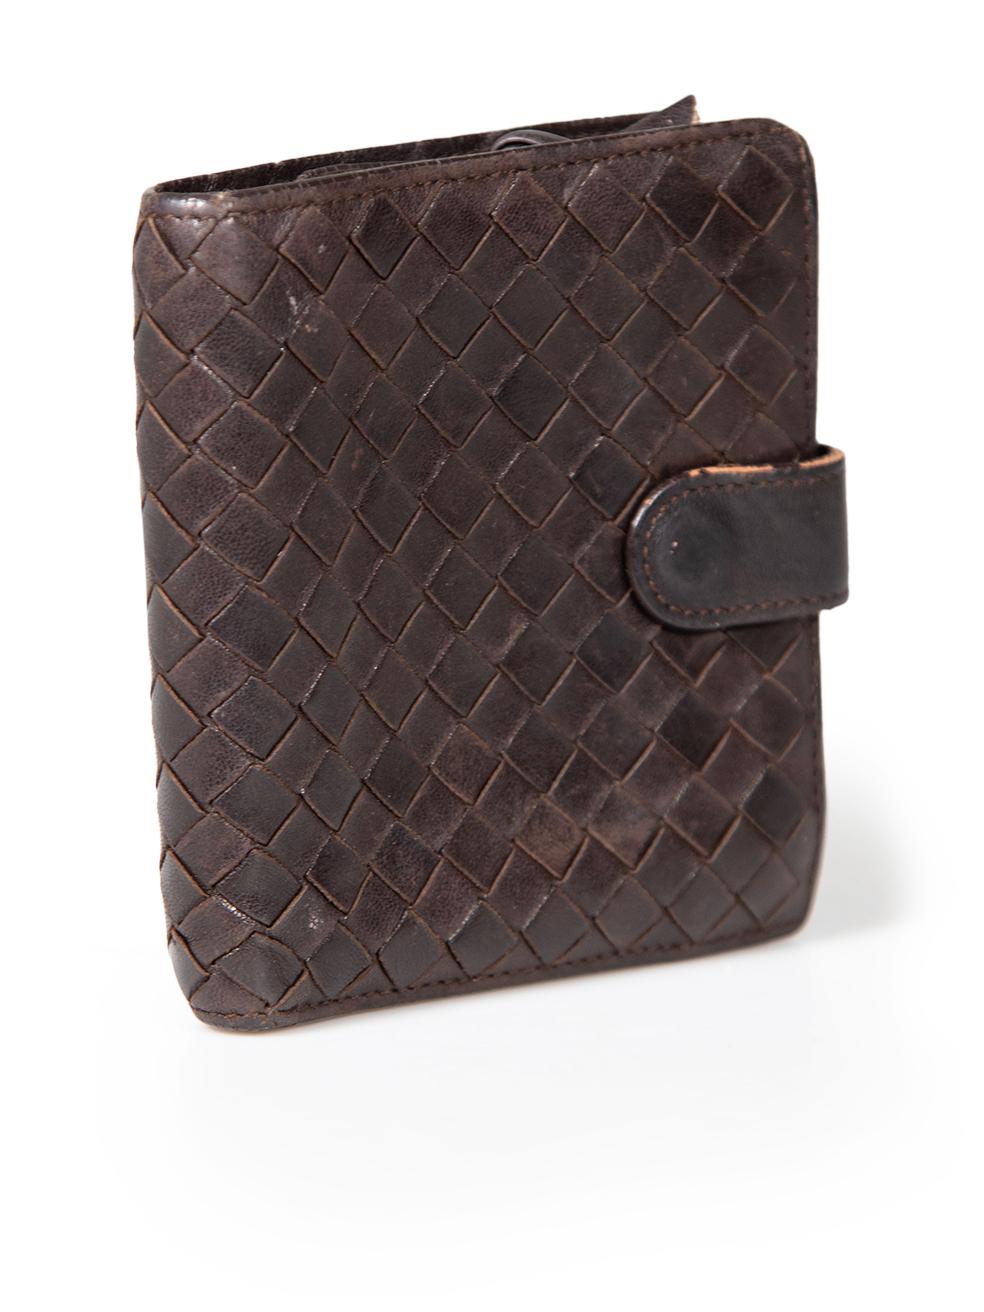 CONDITION is Good. General wear to wallet is evident. Moderate signs of wear to leather trims throughout with wear to leather coating on this used Bottega Veneta designer resale item.
 
 
 
 Details
 
 
 Brown
 
 Leather
 
 Wallet
 
 Intrecciato